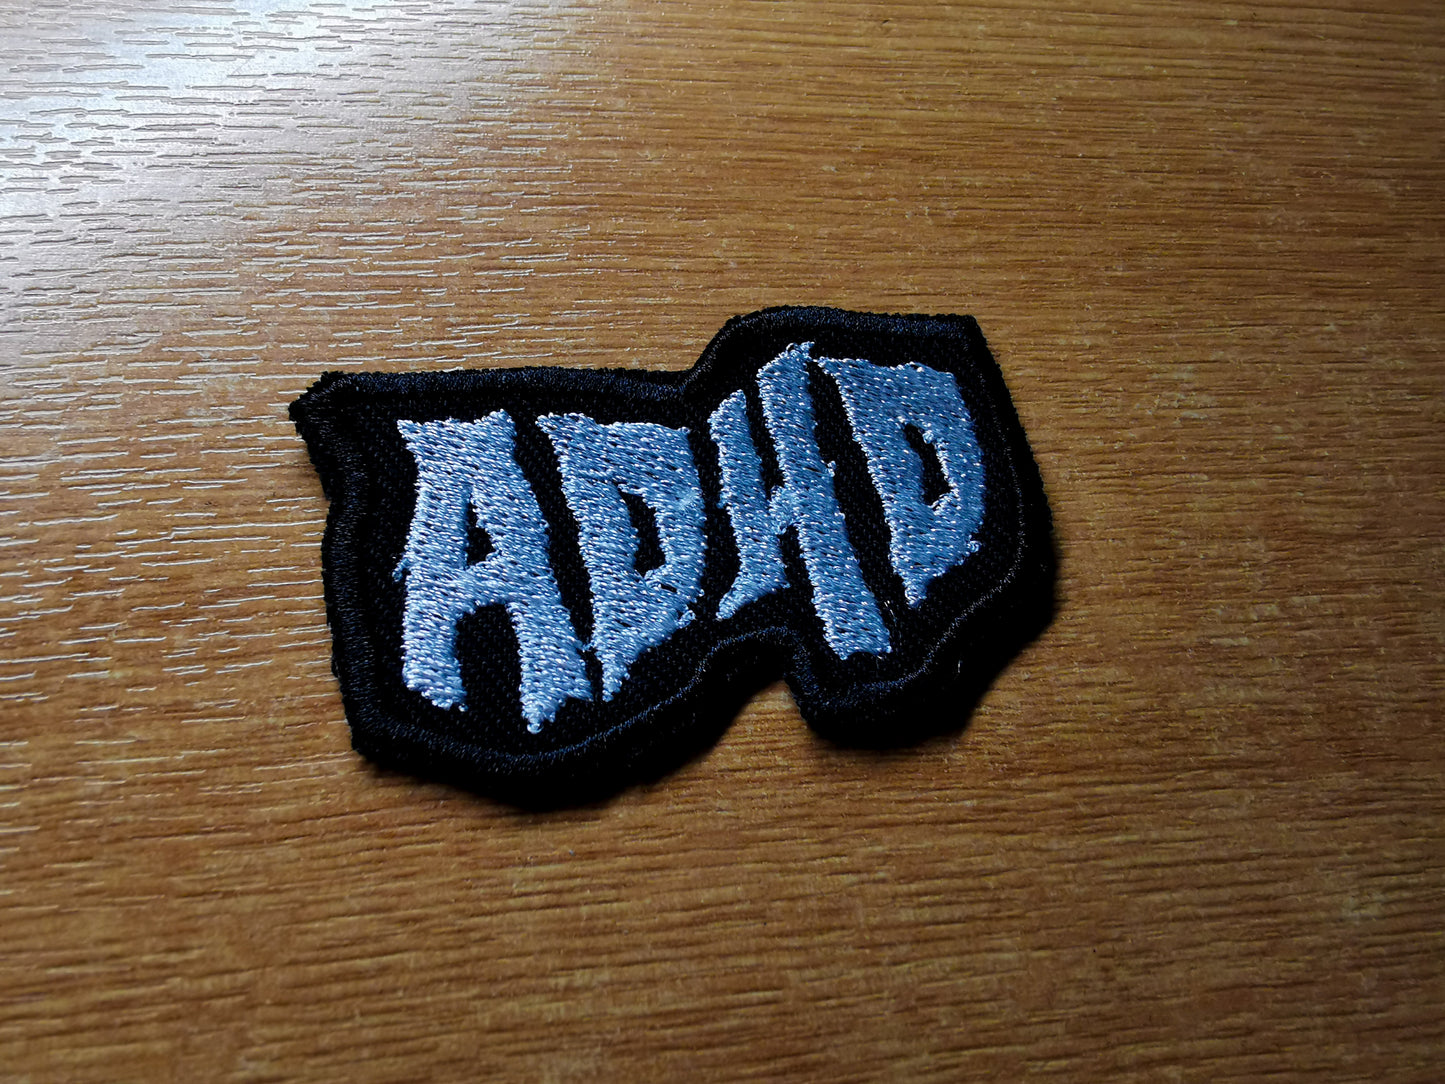 ADHD Death Metal Style Embroidered Patch Neurodivergent Black Metal Patches